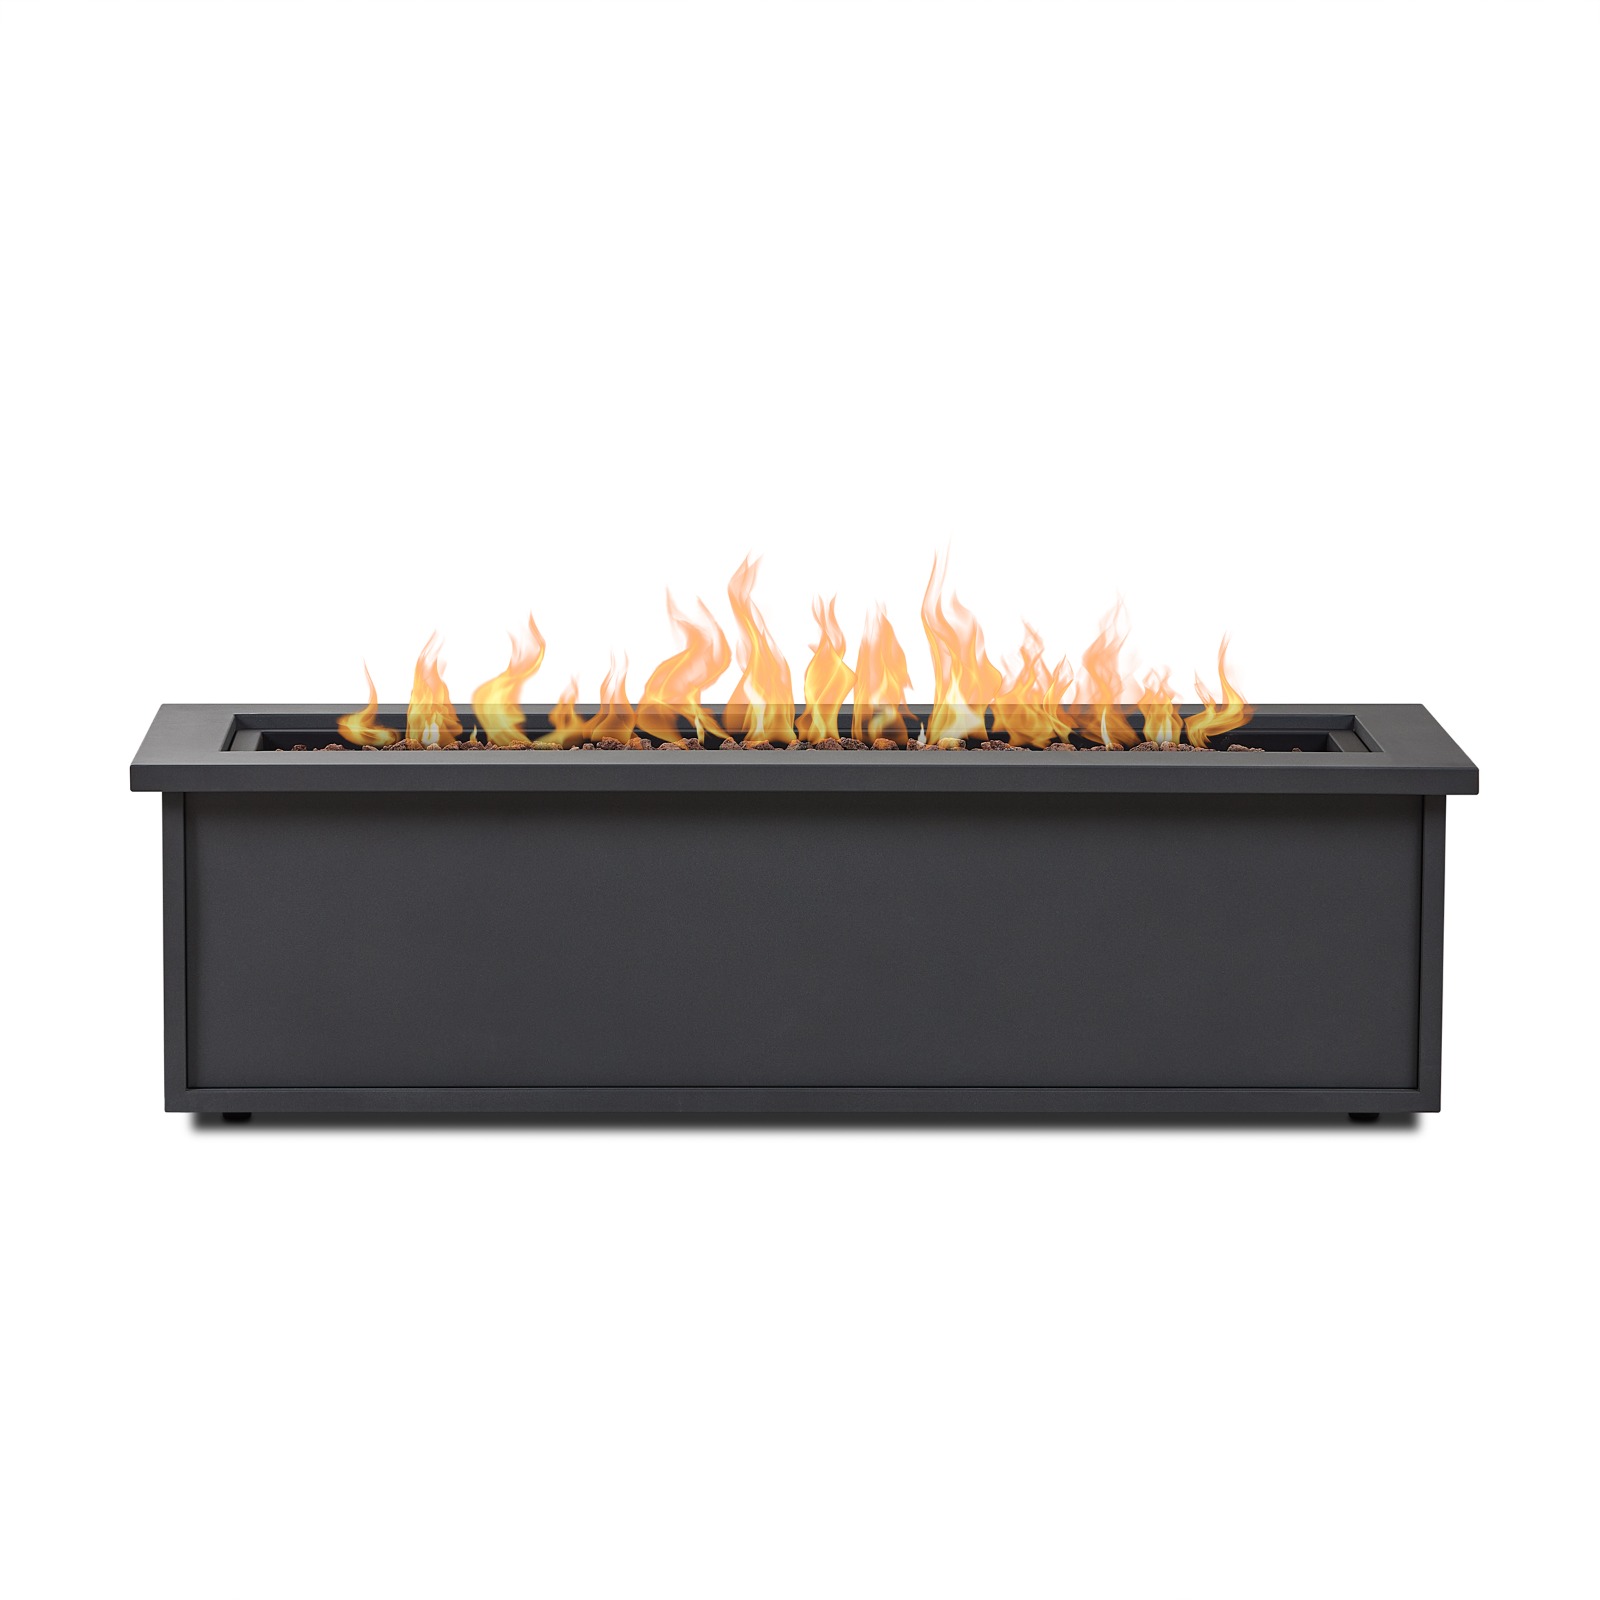 Mila Propane Fire Pit Fire Bowl Outdoor Fireplace Fire Table for Backyard or Patio